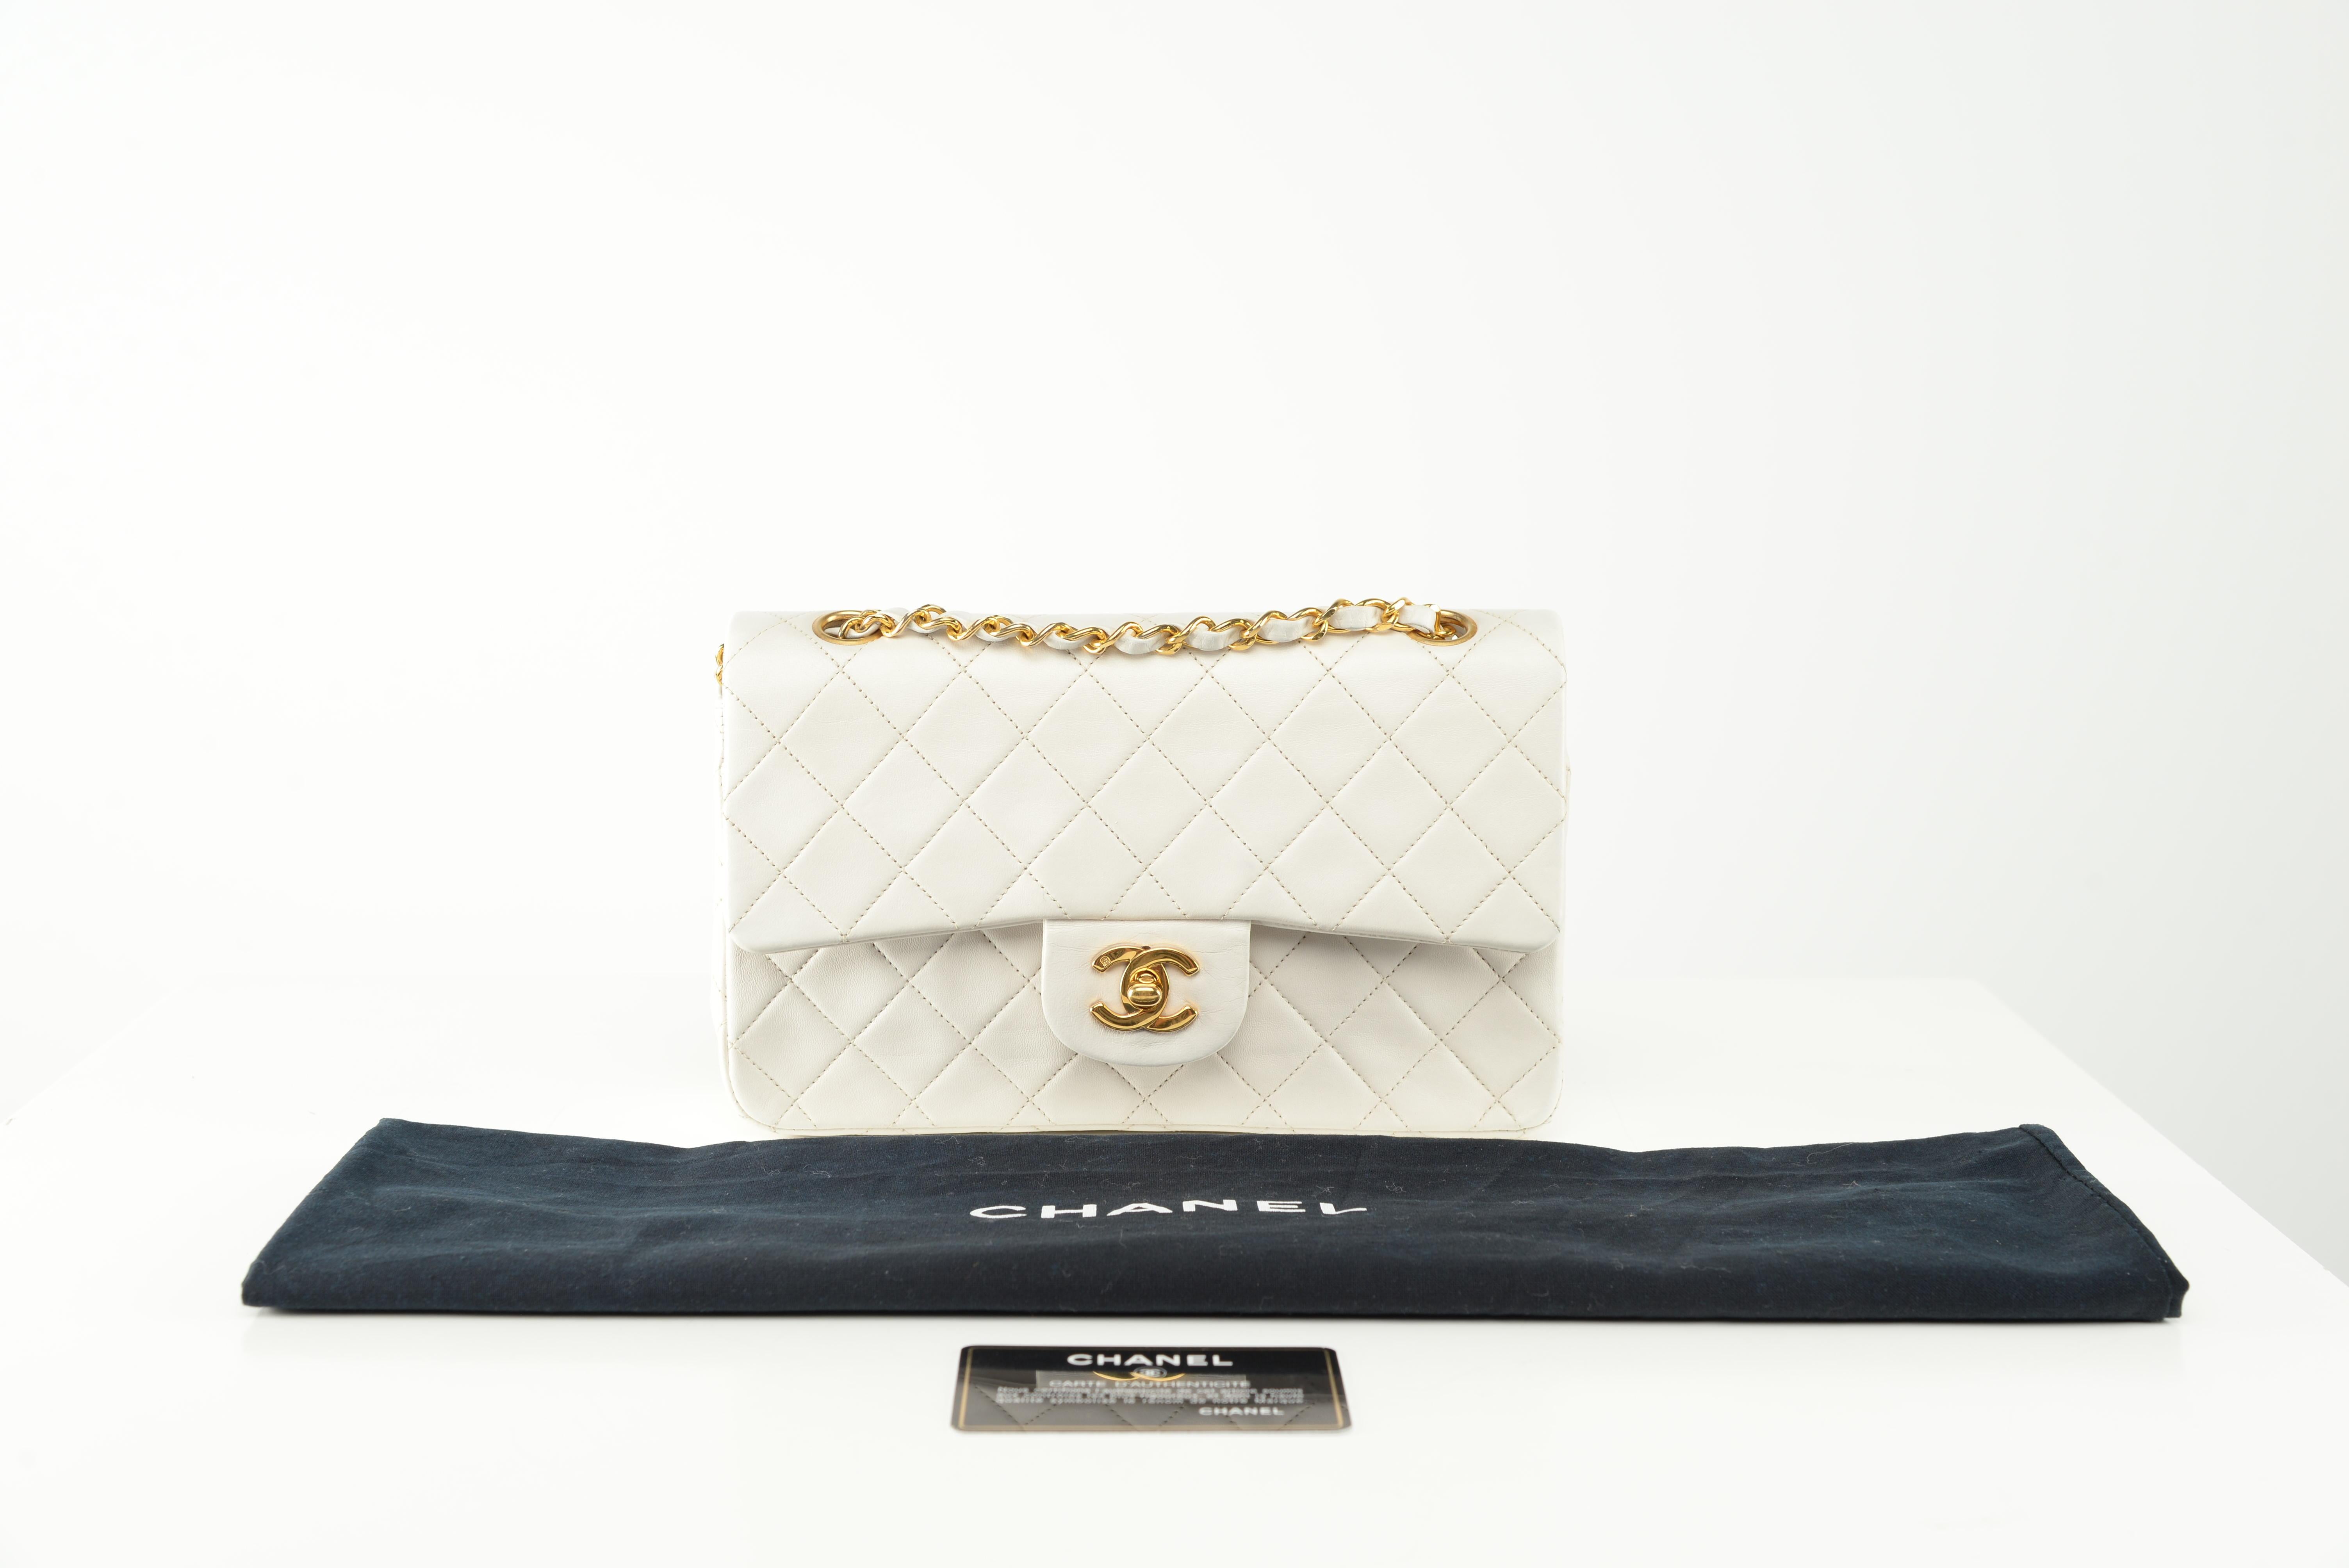 From the collection of SAVINETI we offer this Chanel Classic Flap Small:
-	Brand: Chanel
-	Model: Classic Flap Small
-	Year: 1989-1991
-	Code: 1386799
-	Condition: Good vintage condition
-	Materials: Lambskin leather, 24k gold-plated